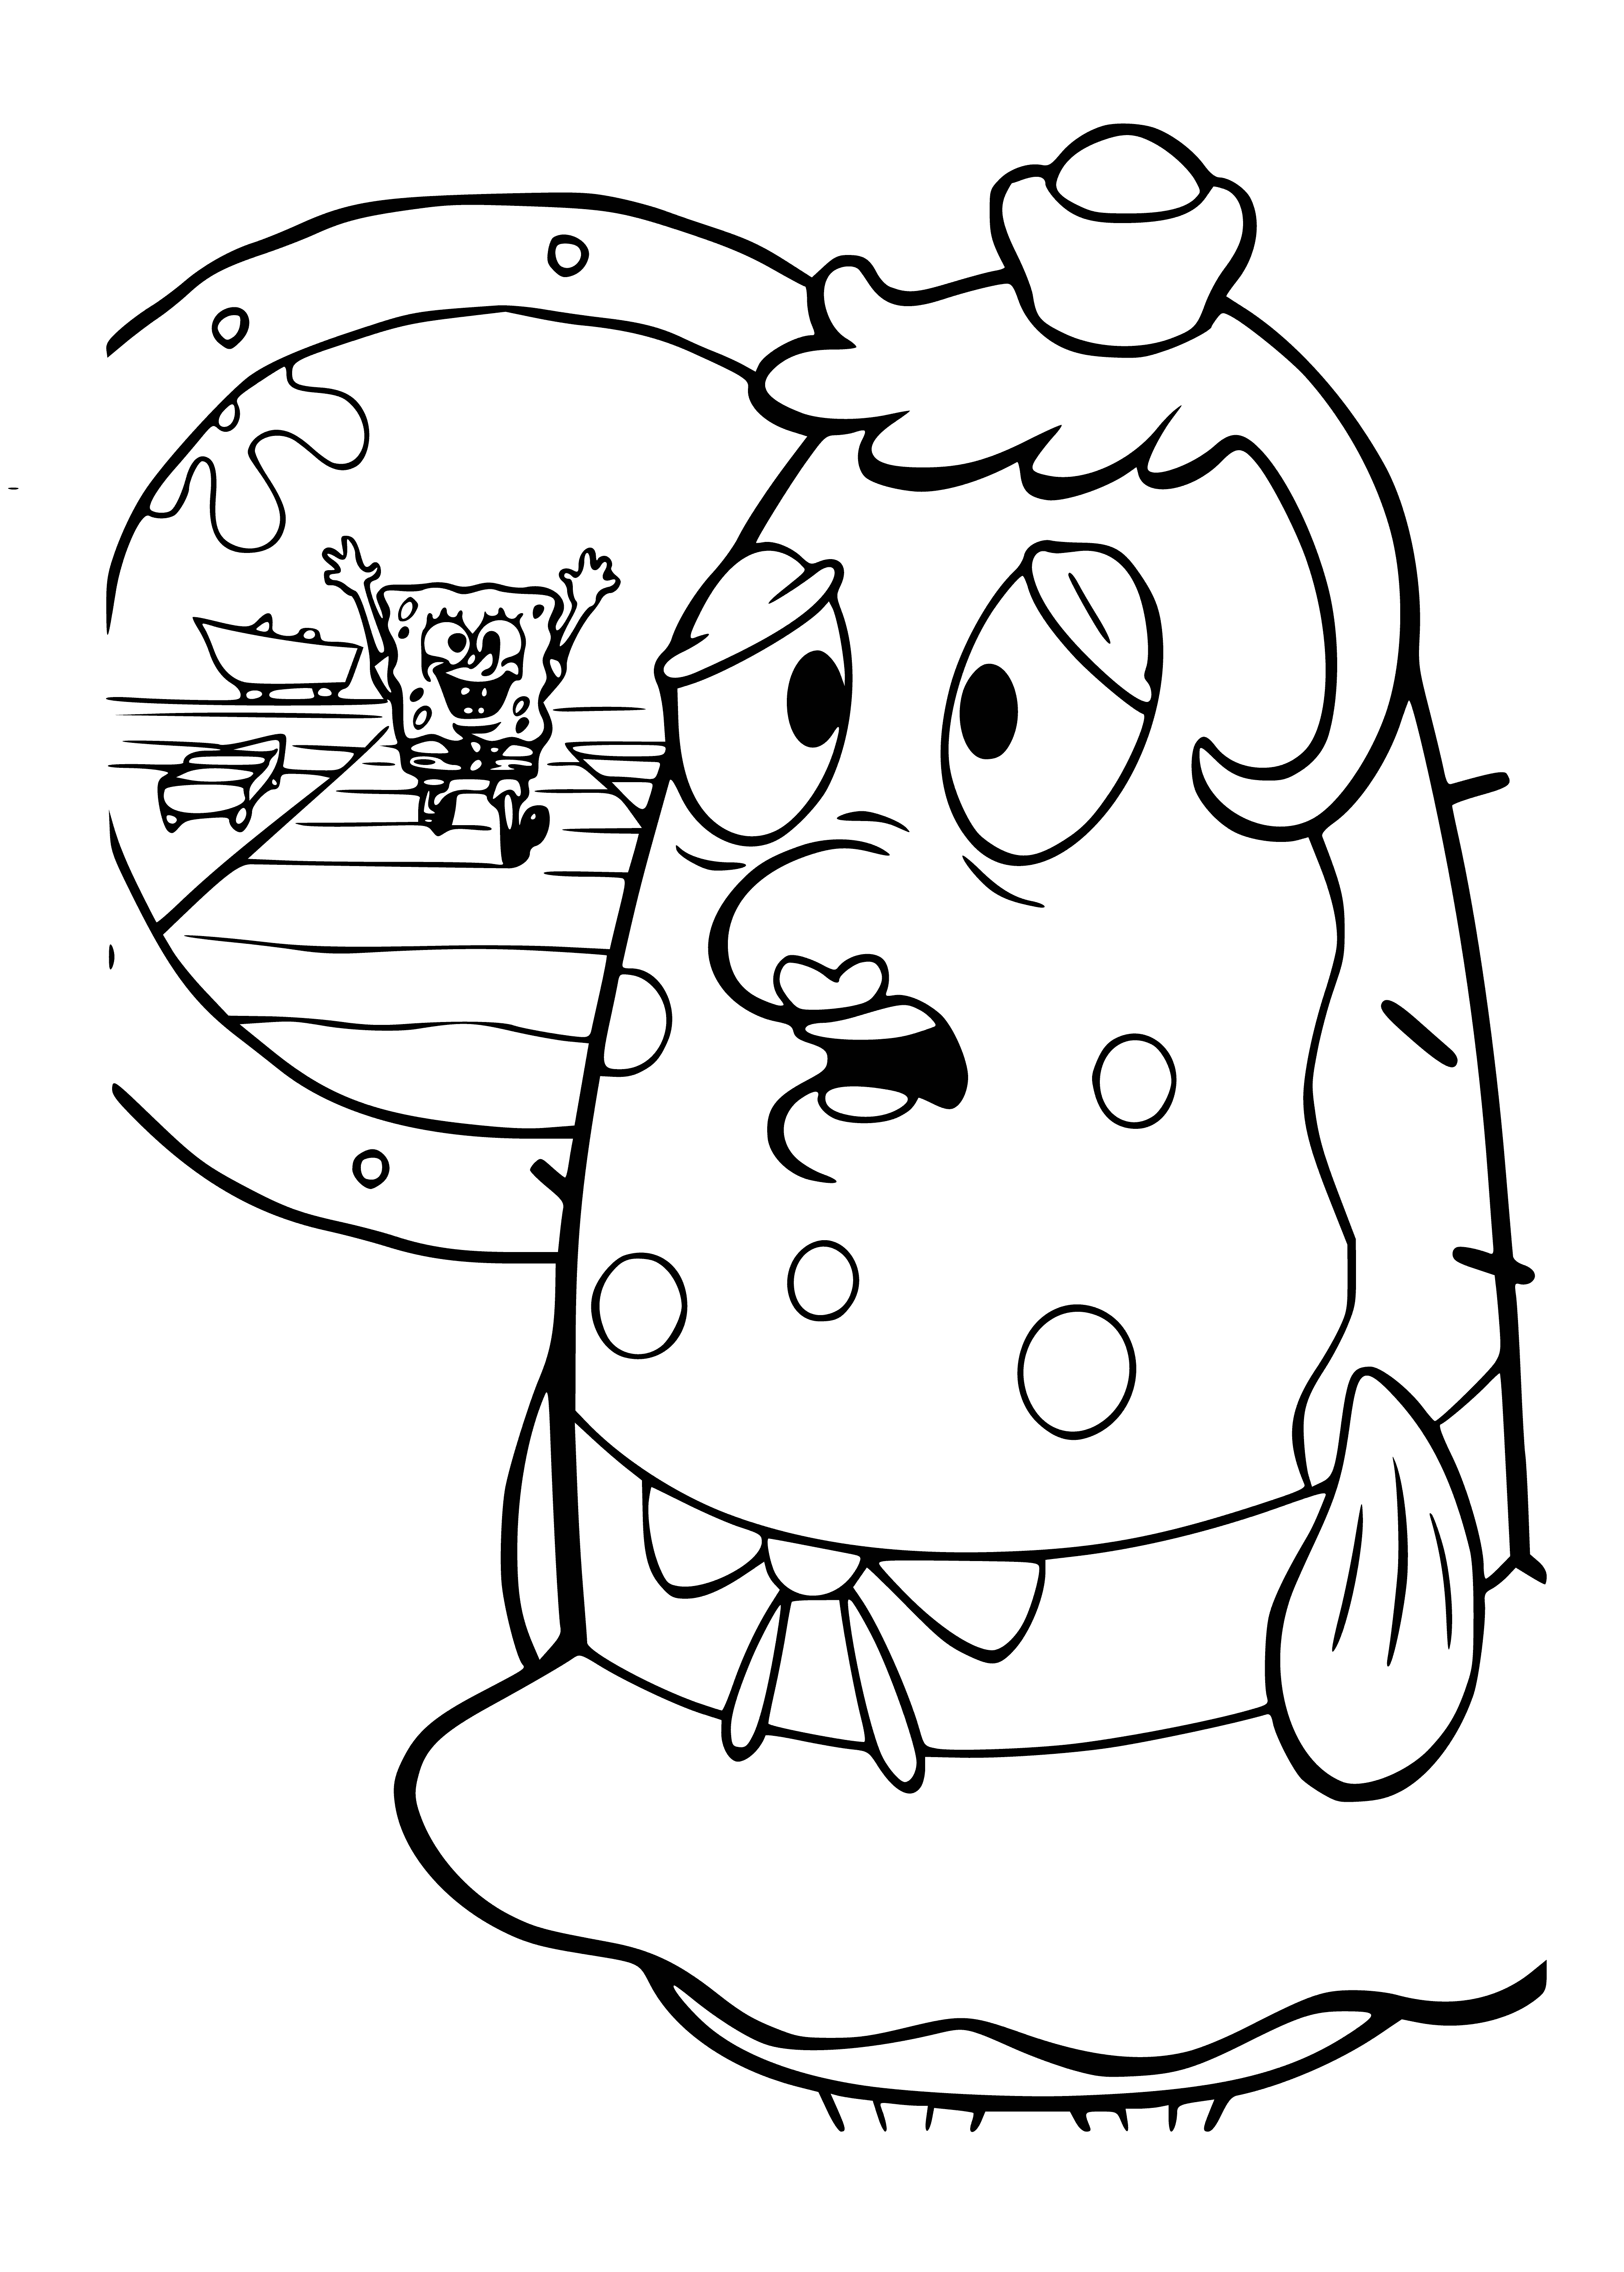 coloring page: Colorful SpongeBob Squarepants next to a plant with light yellow body and light brown pants, two blue eyes, and a big smile.